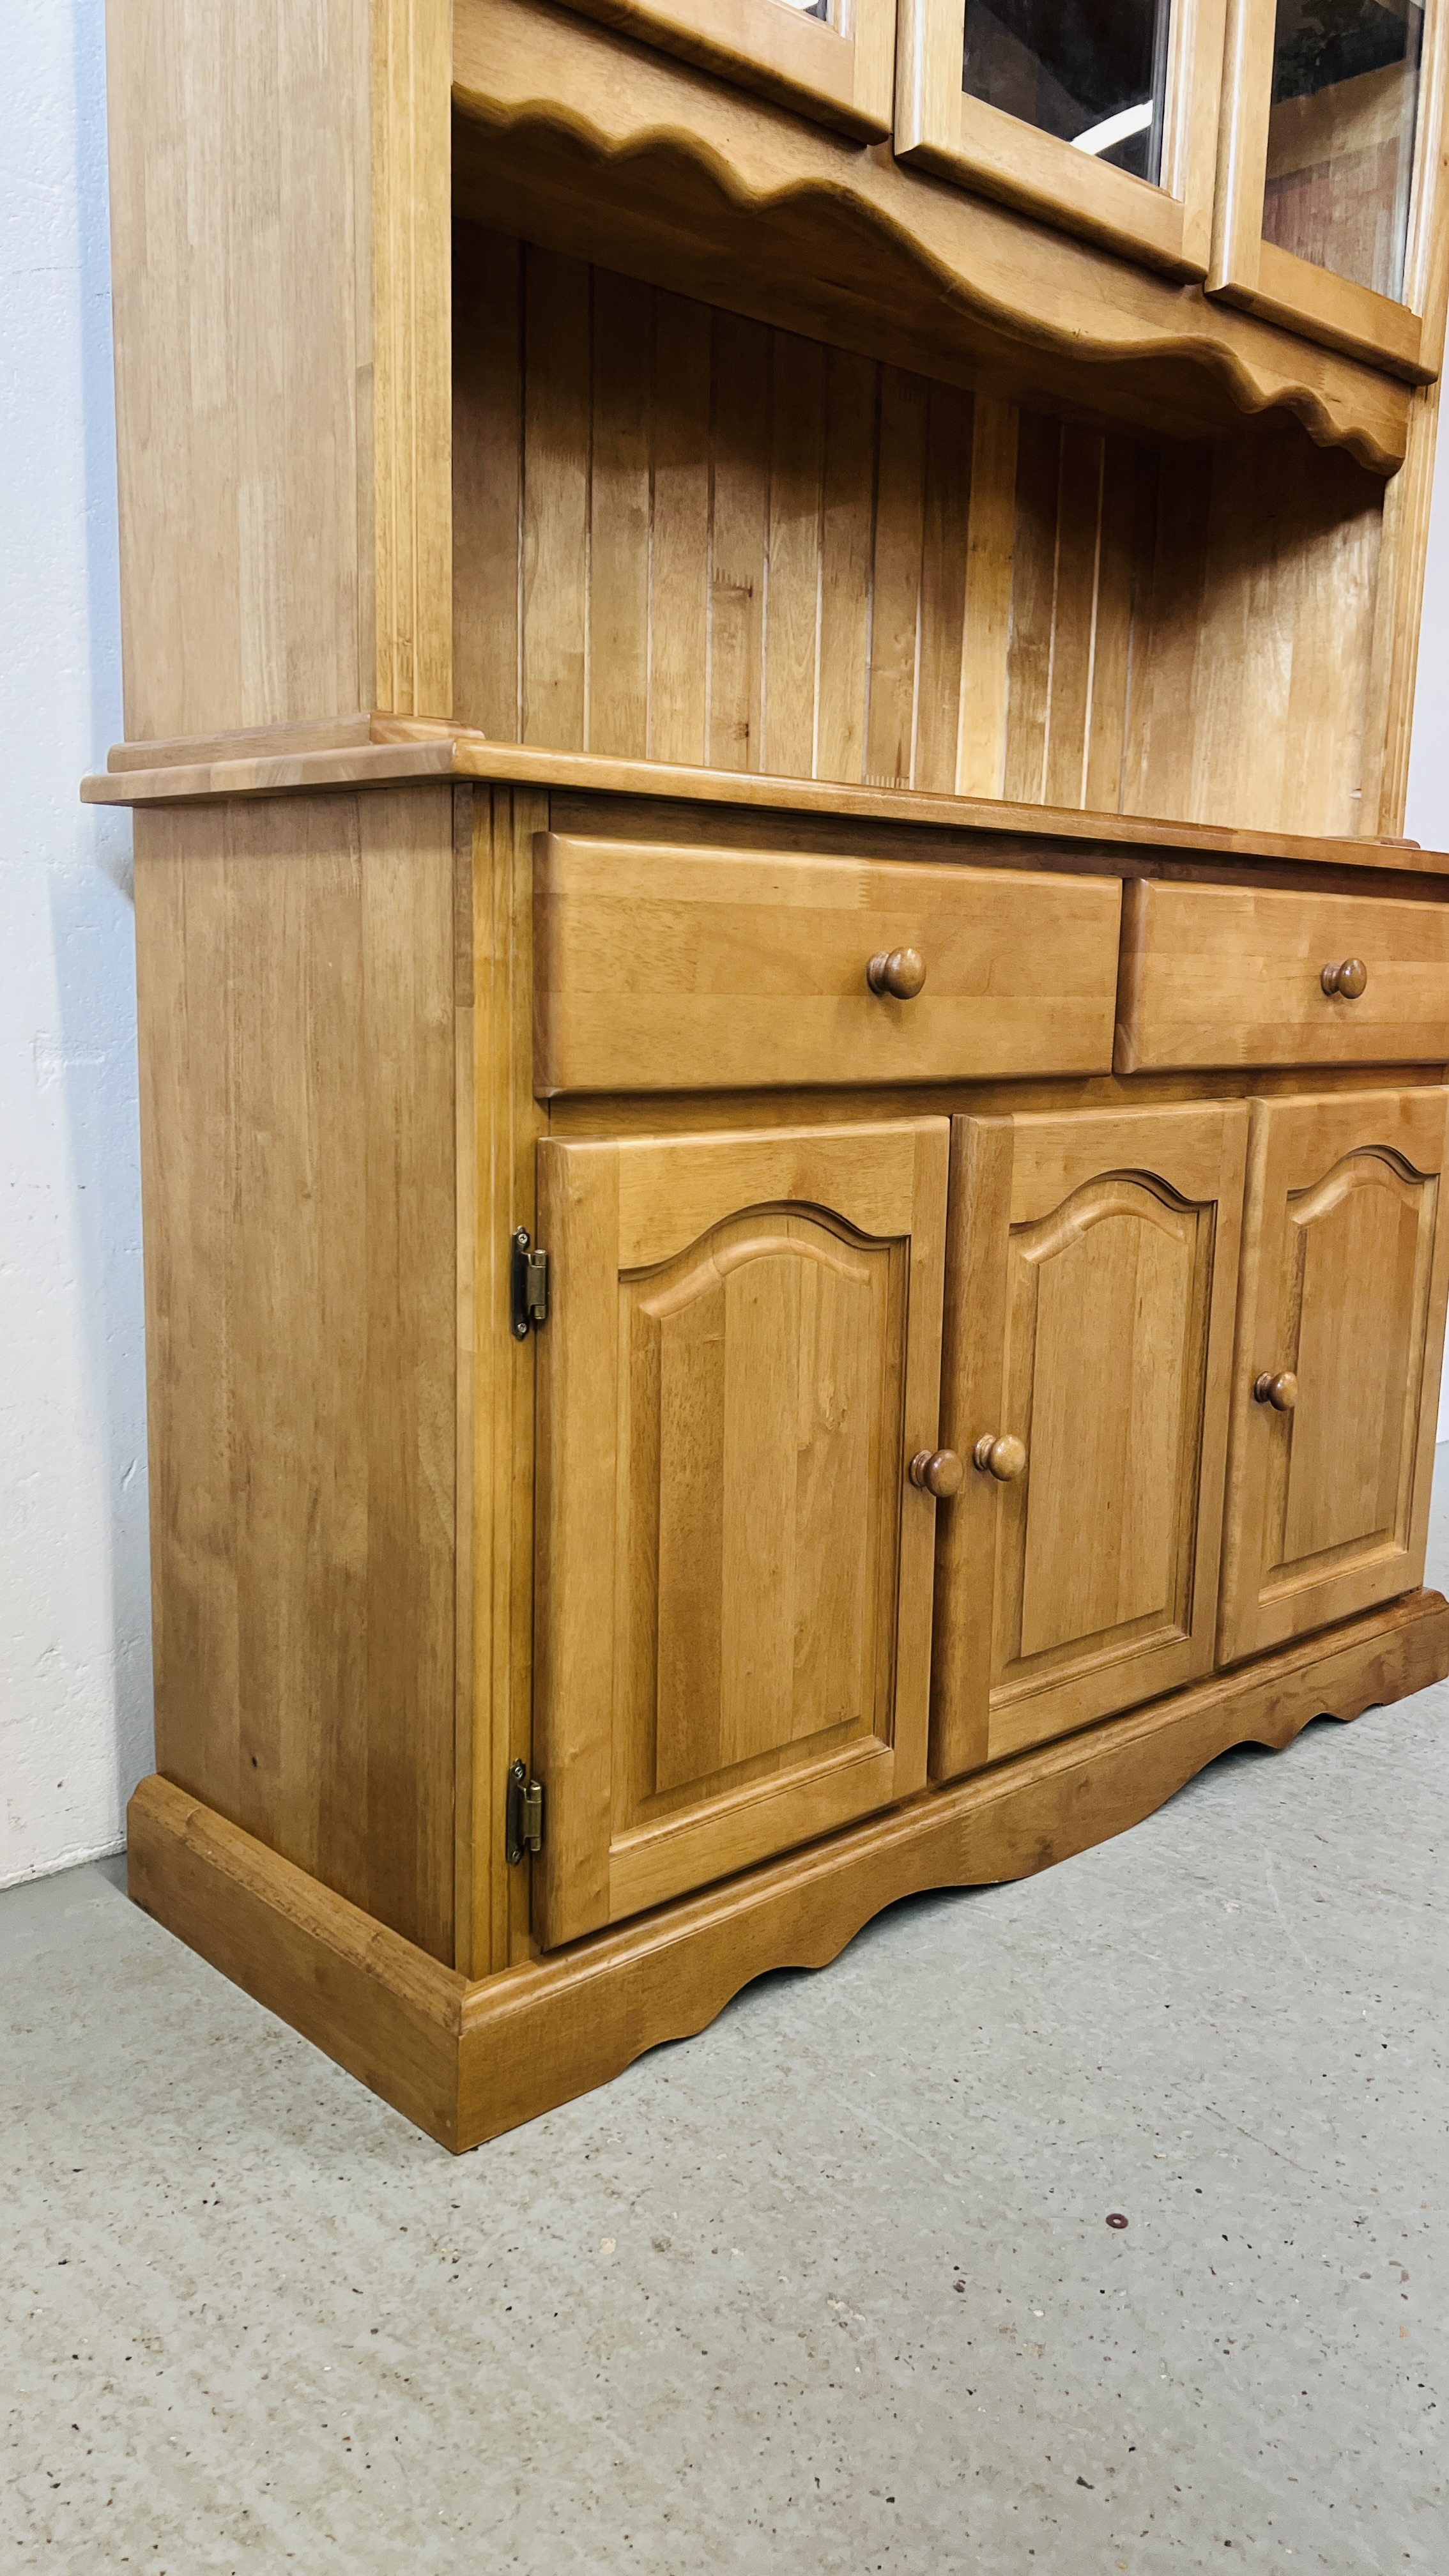 A GOOD QUALITY THREE DOOR GLAZED DRESSER WITH TWO DRAWER THREE DOOR CABINET BASE 128CM X 45CM X - Image 10 of 12